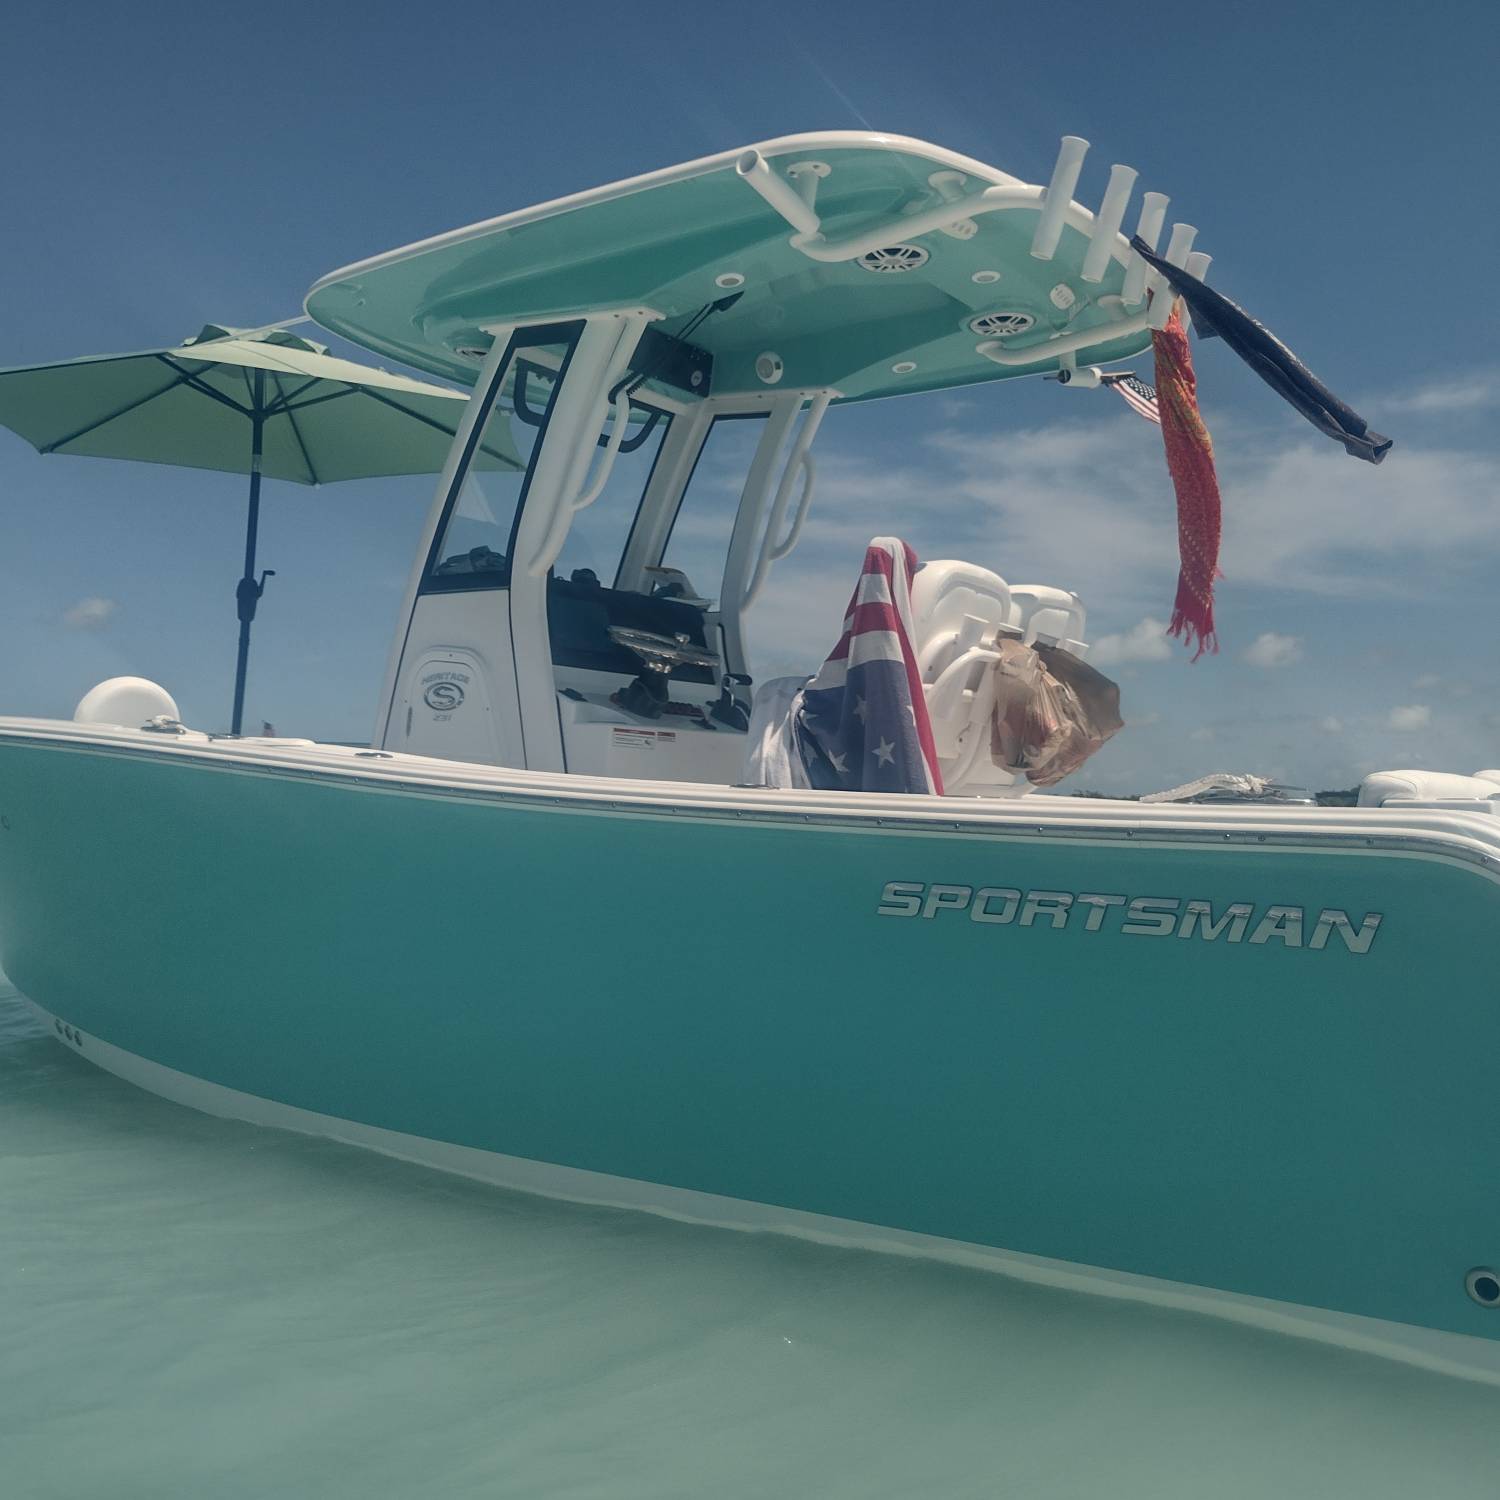 Title: 4th of July weekend - On board their Sportsman Heritage 231 Center Console - Location: Key largo. Participating in the Photo Contest #SportsmanJuly2024